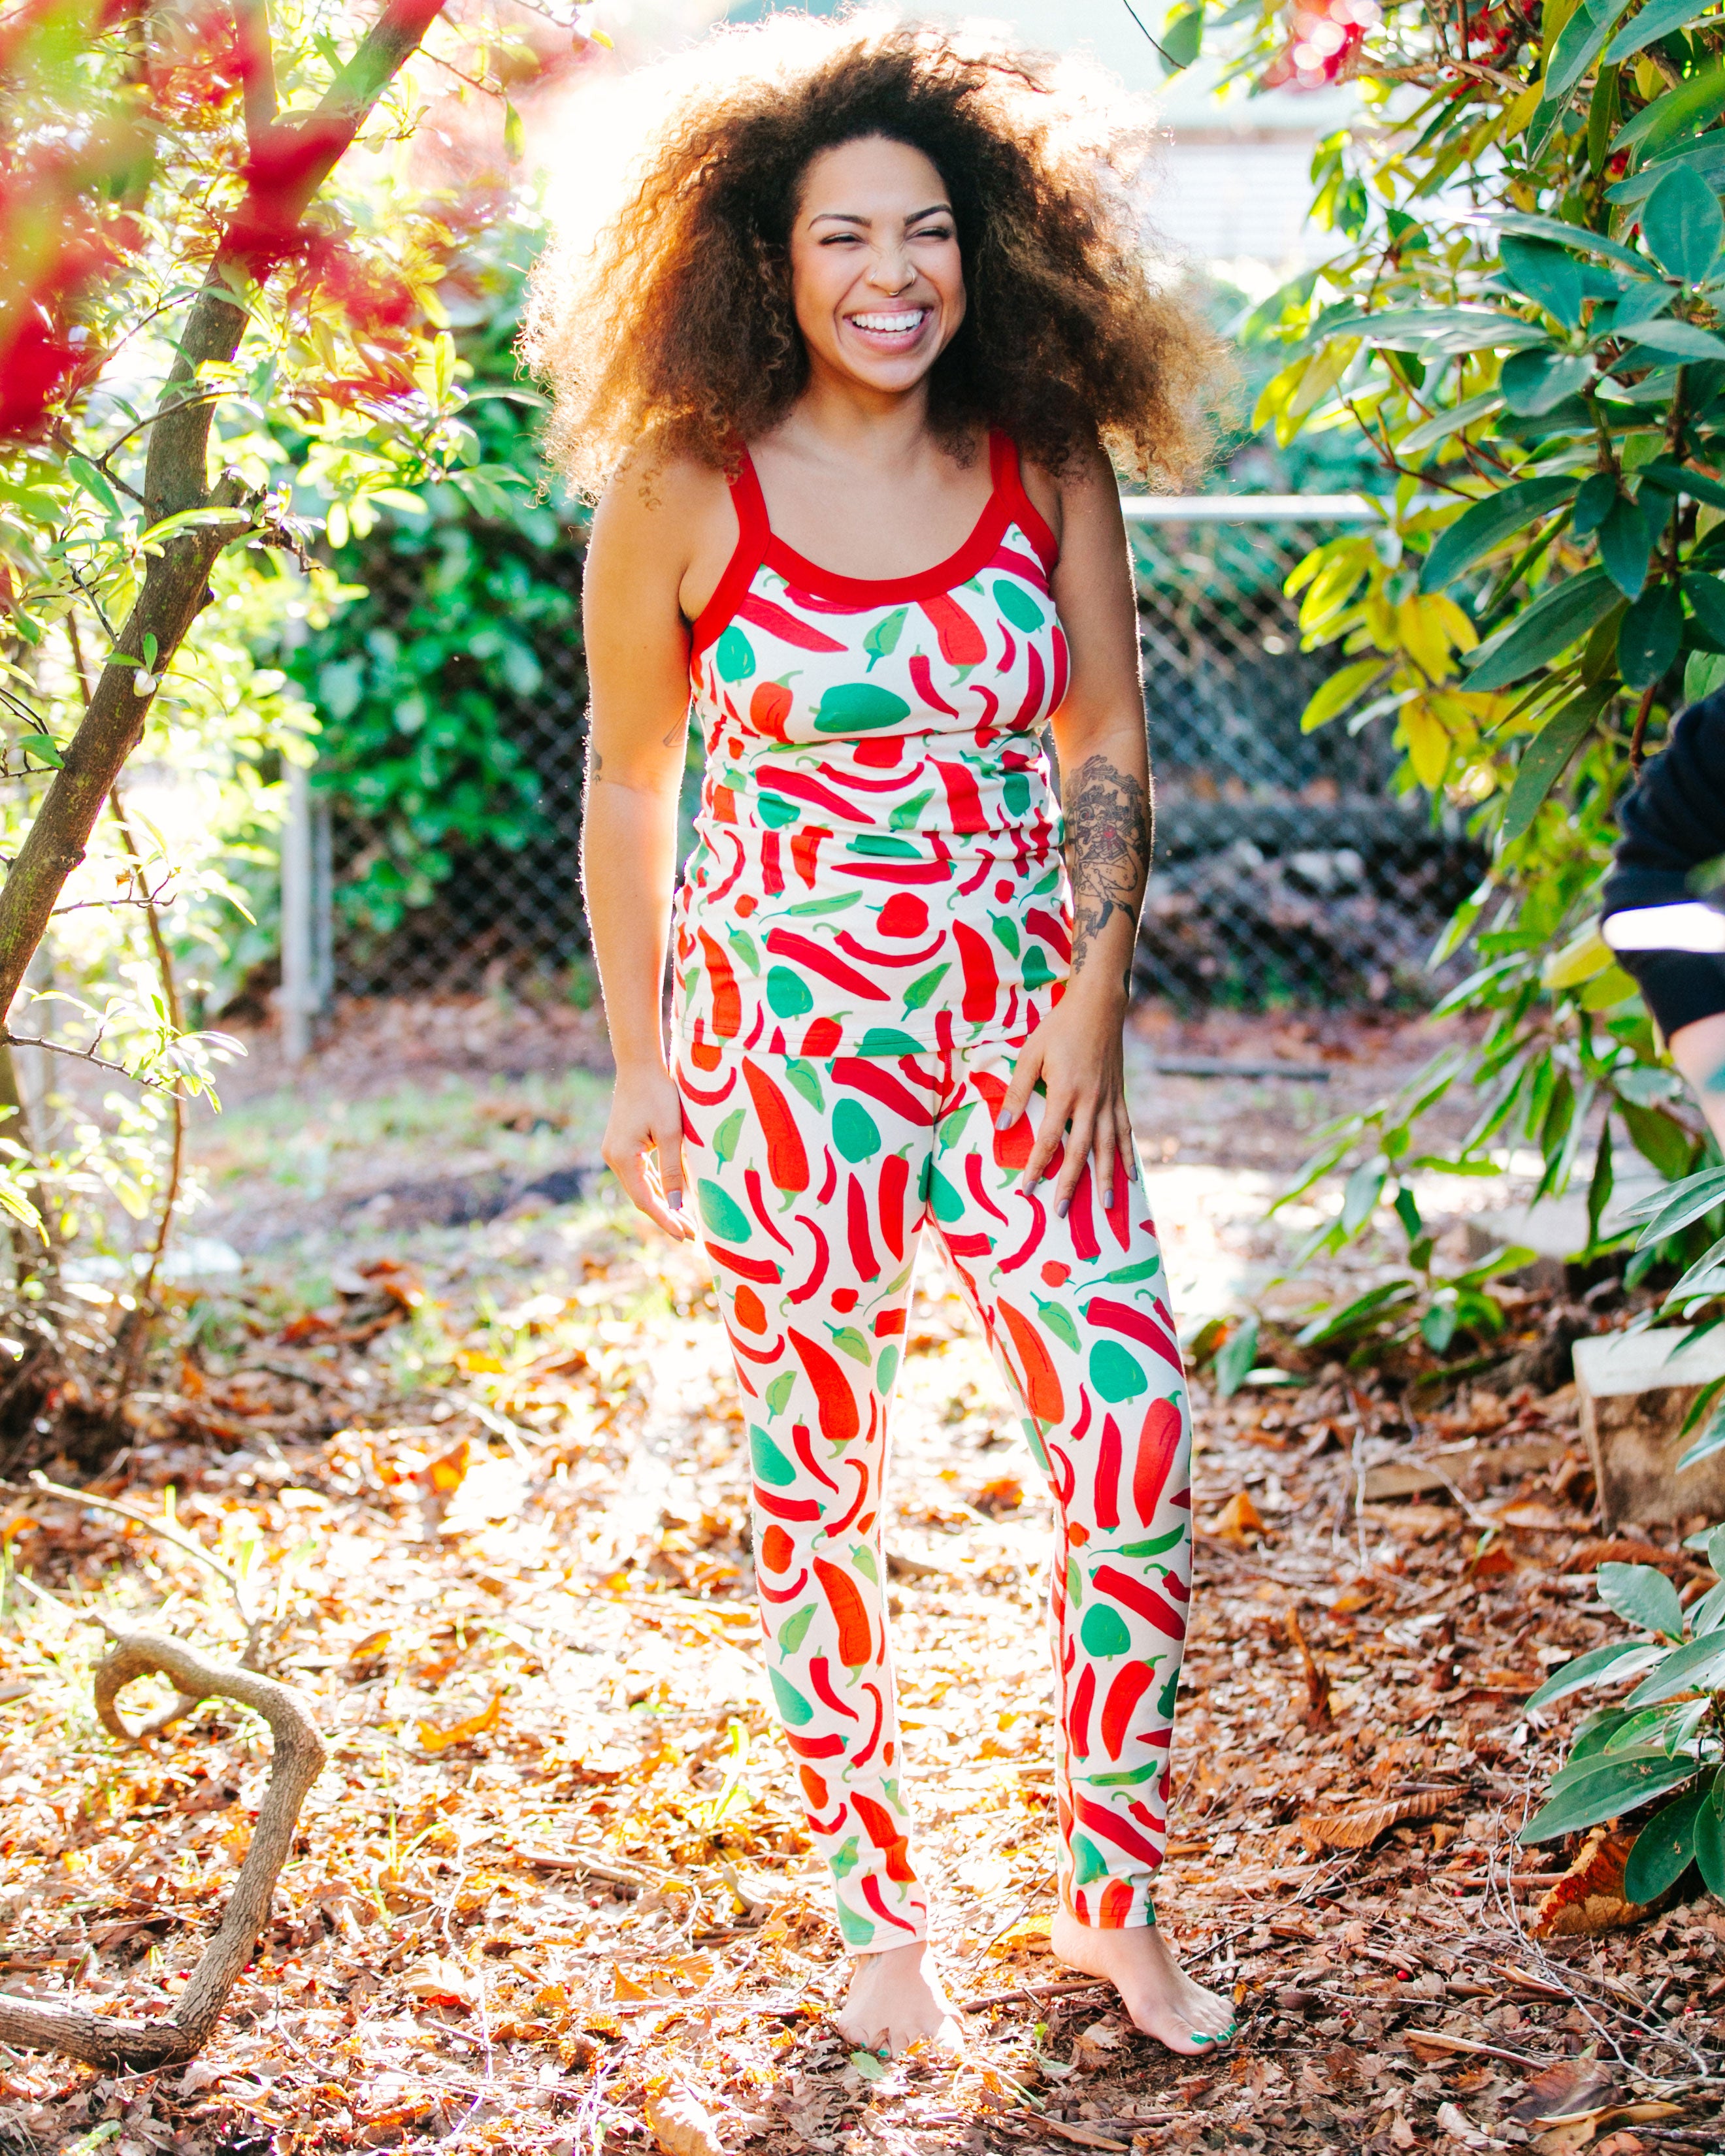 Model smiling big and standing outside wearing Thunderpants organic cotton Leggings and Camisole in our Hot Pants print: various green, orange, and red peppers printed on Vanilla with red binding.